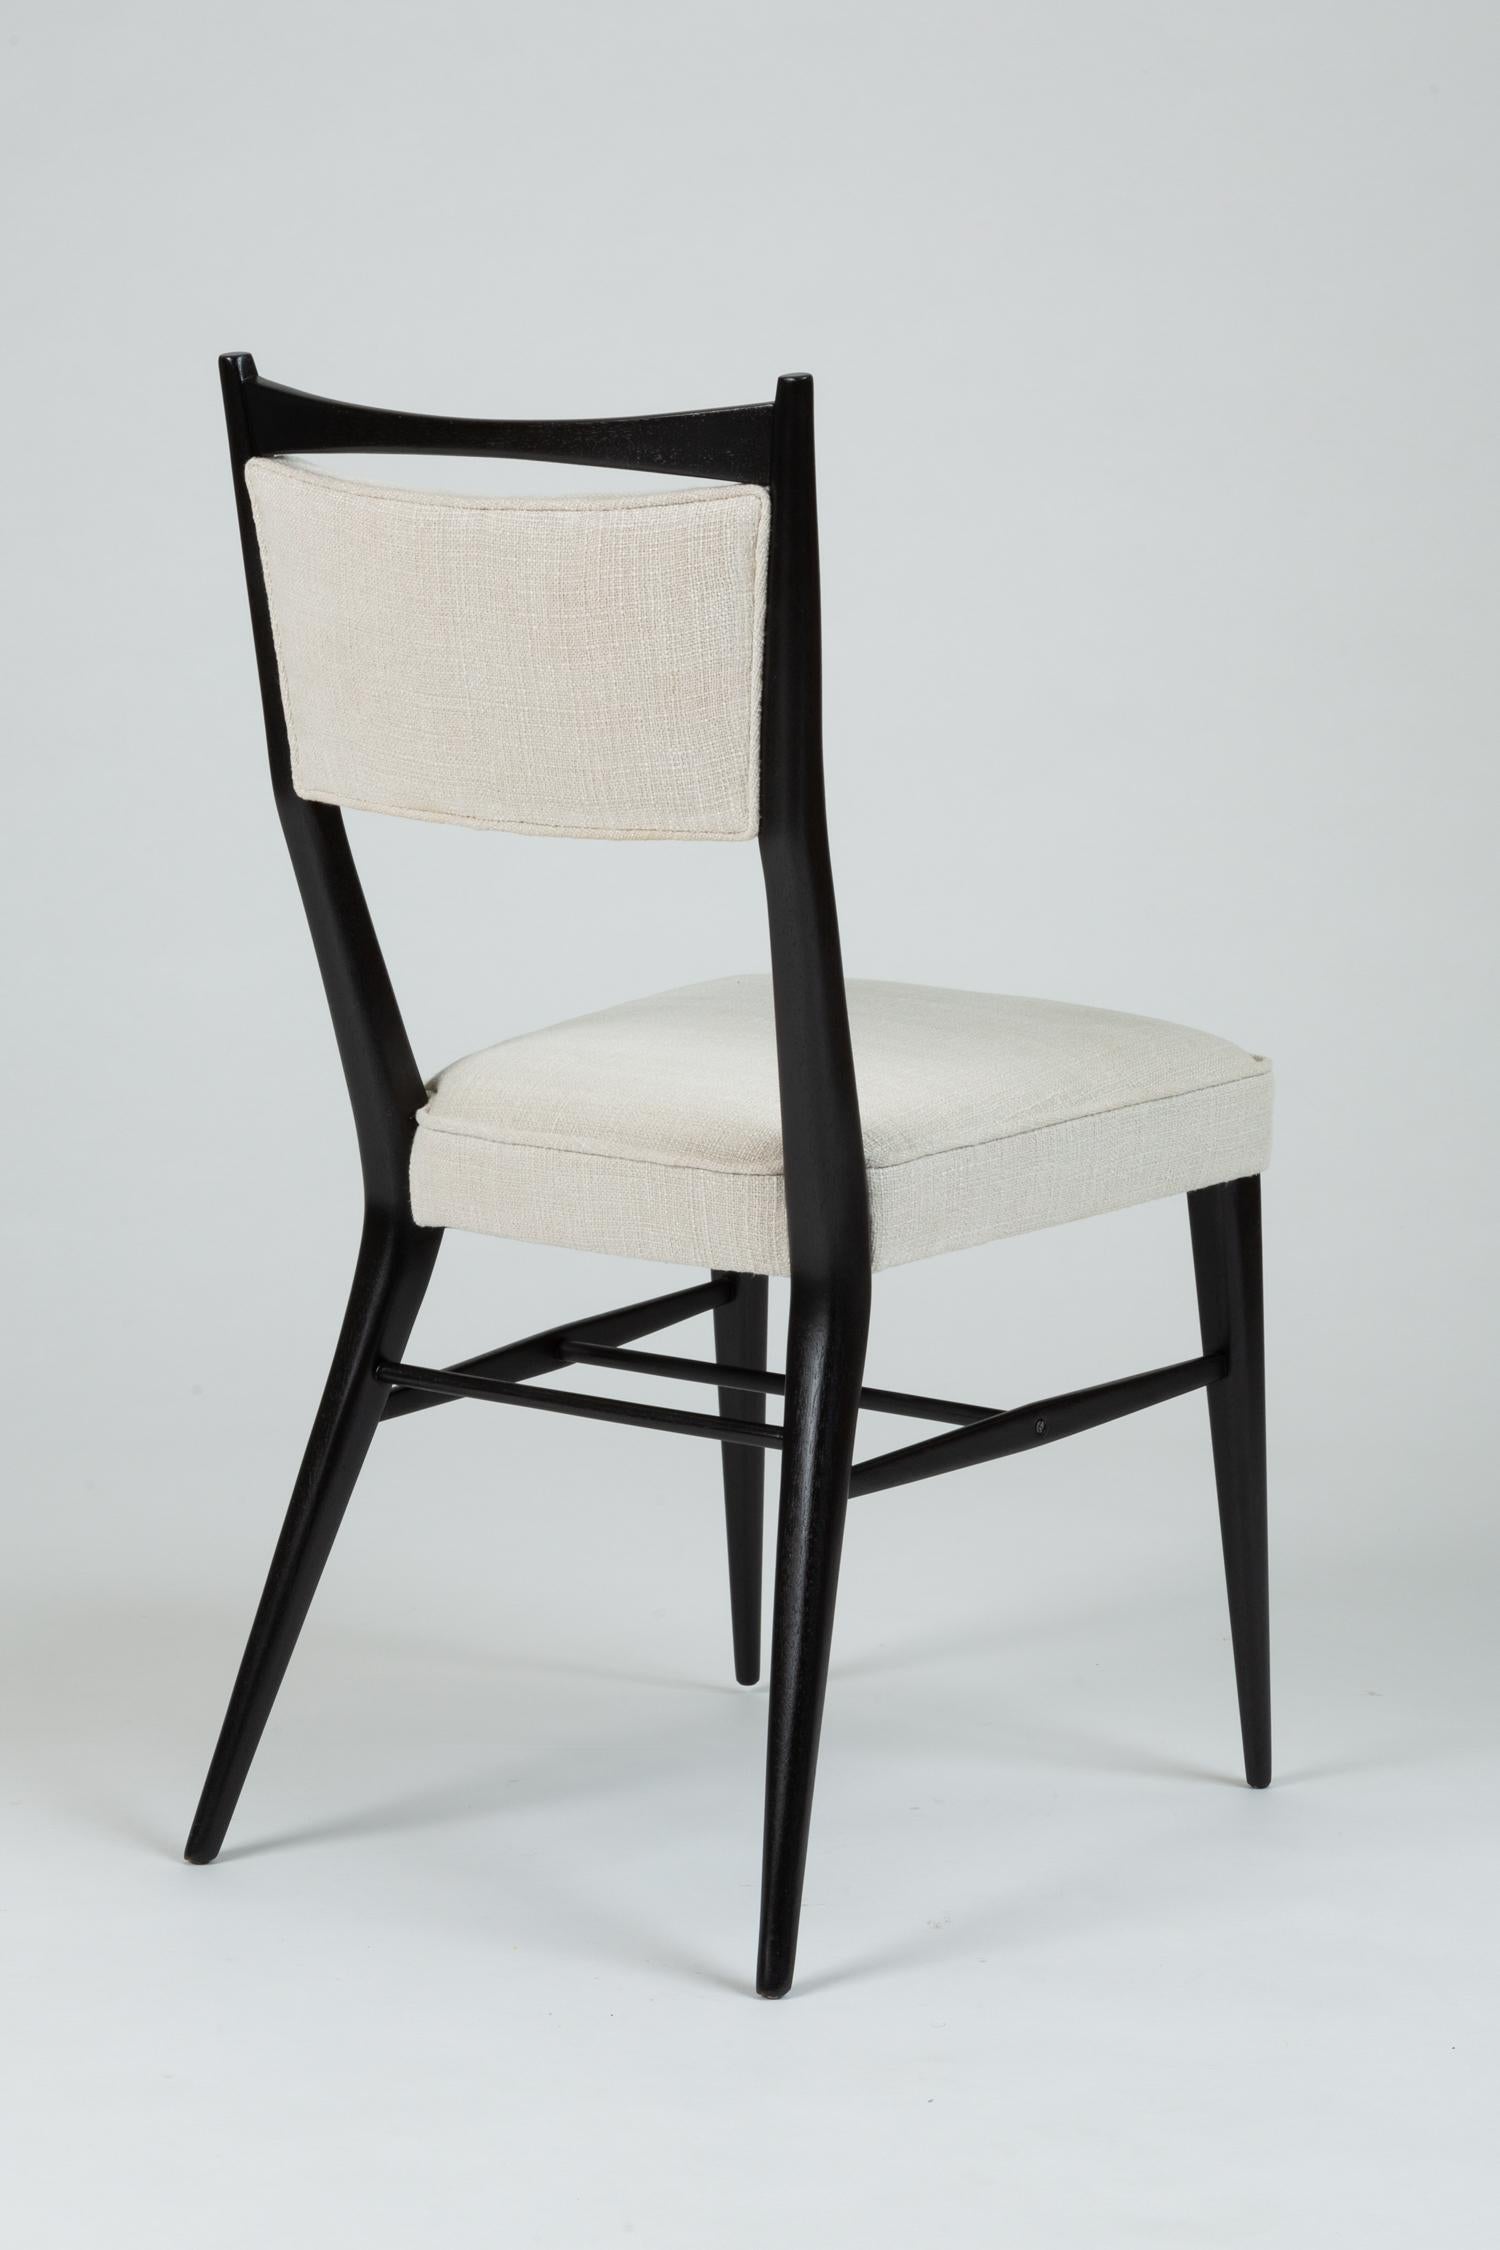 Mid-20th Century Connoisseur Group Side Chair by Paul McCobb for H. Sacks and Sons